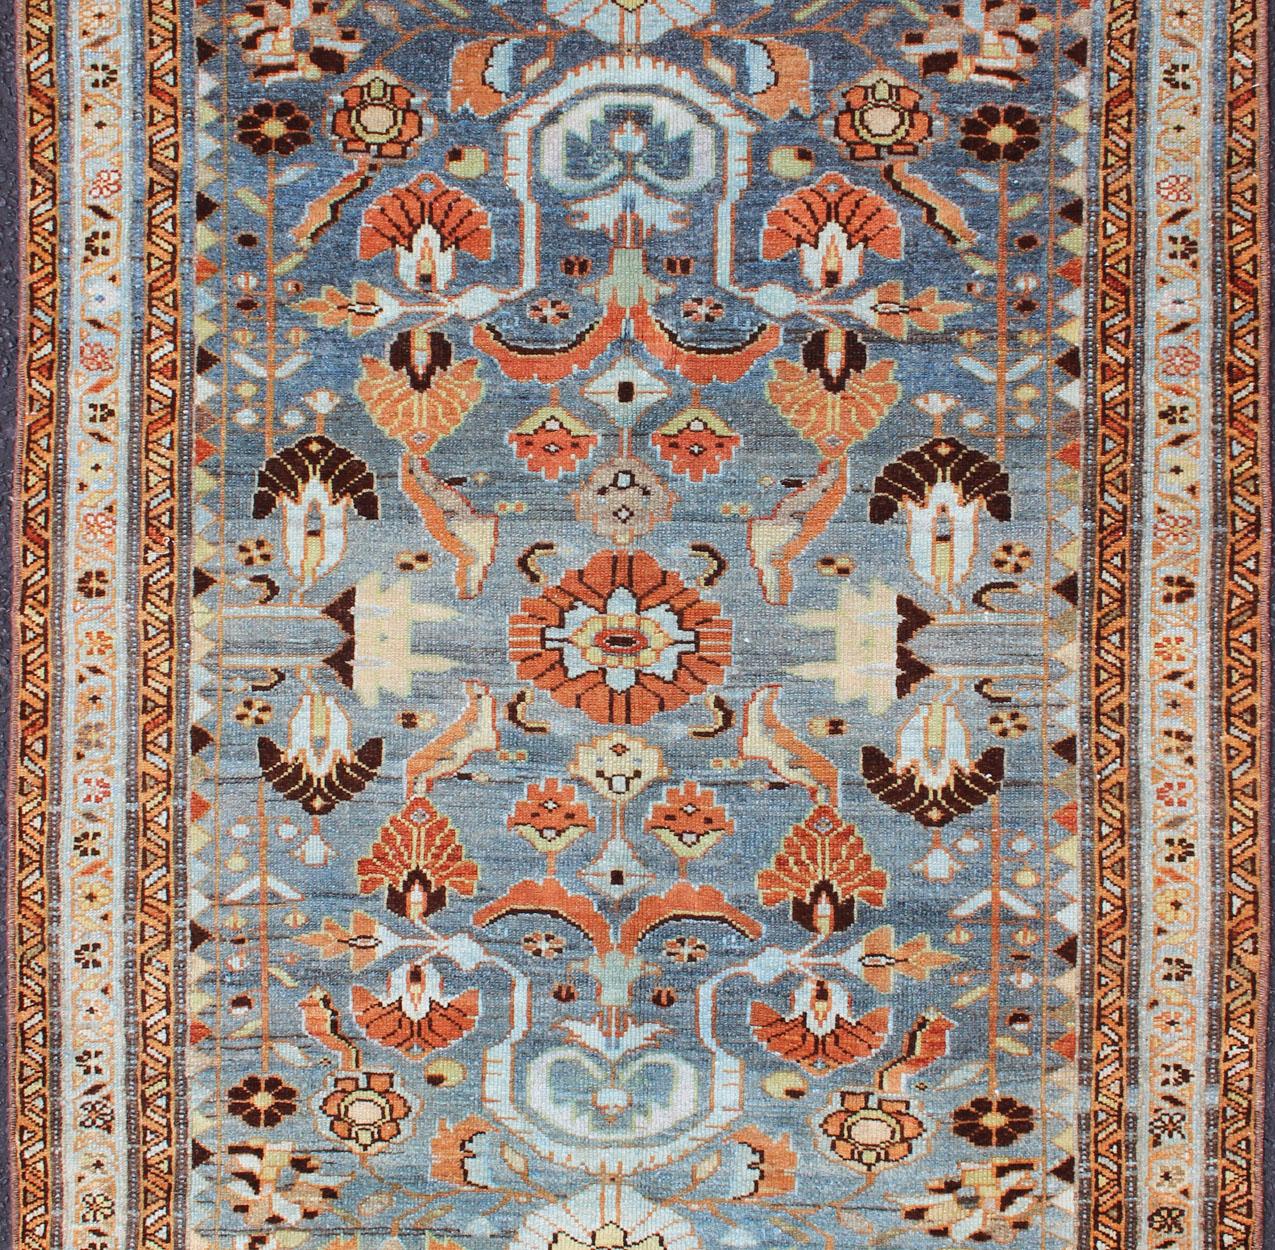 Antique Persian Malayer rug with blue field and stylized floral design, rug SUS-2007-218, country of origin / type: Iran / Malayer, circa 1930.

This antique Persian Malayer rug (circa 1930s) features a unique blend of colors and an intricately